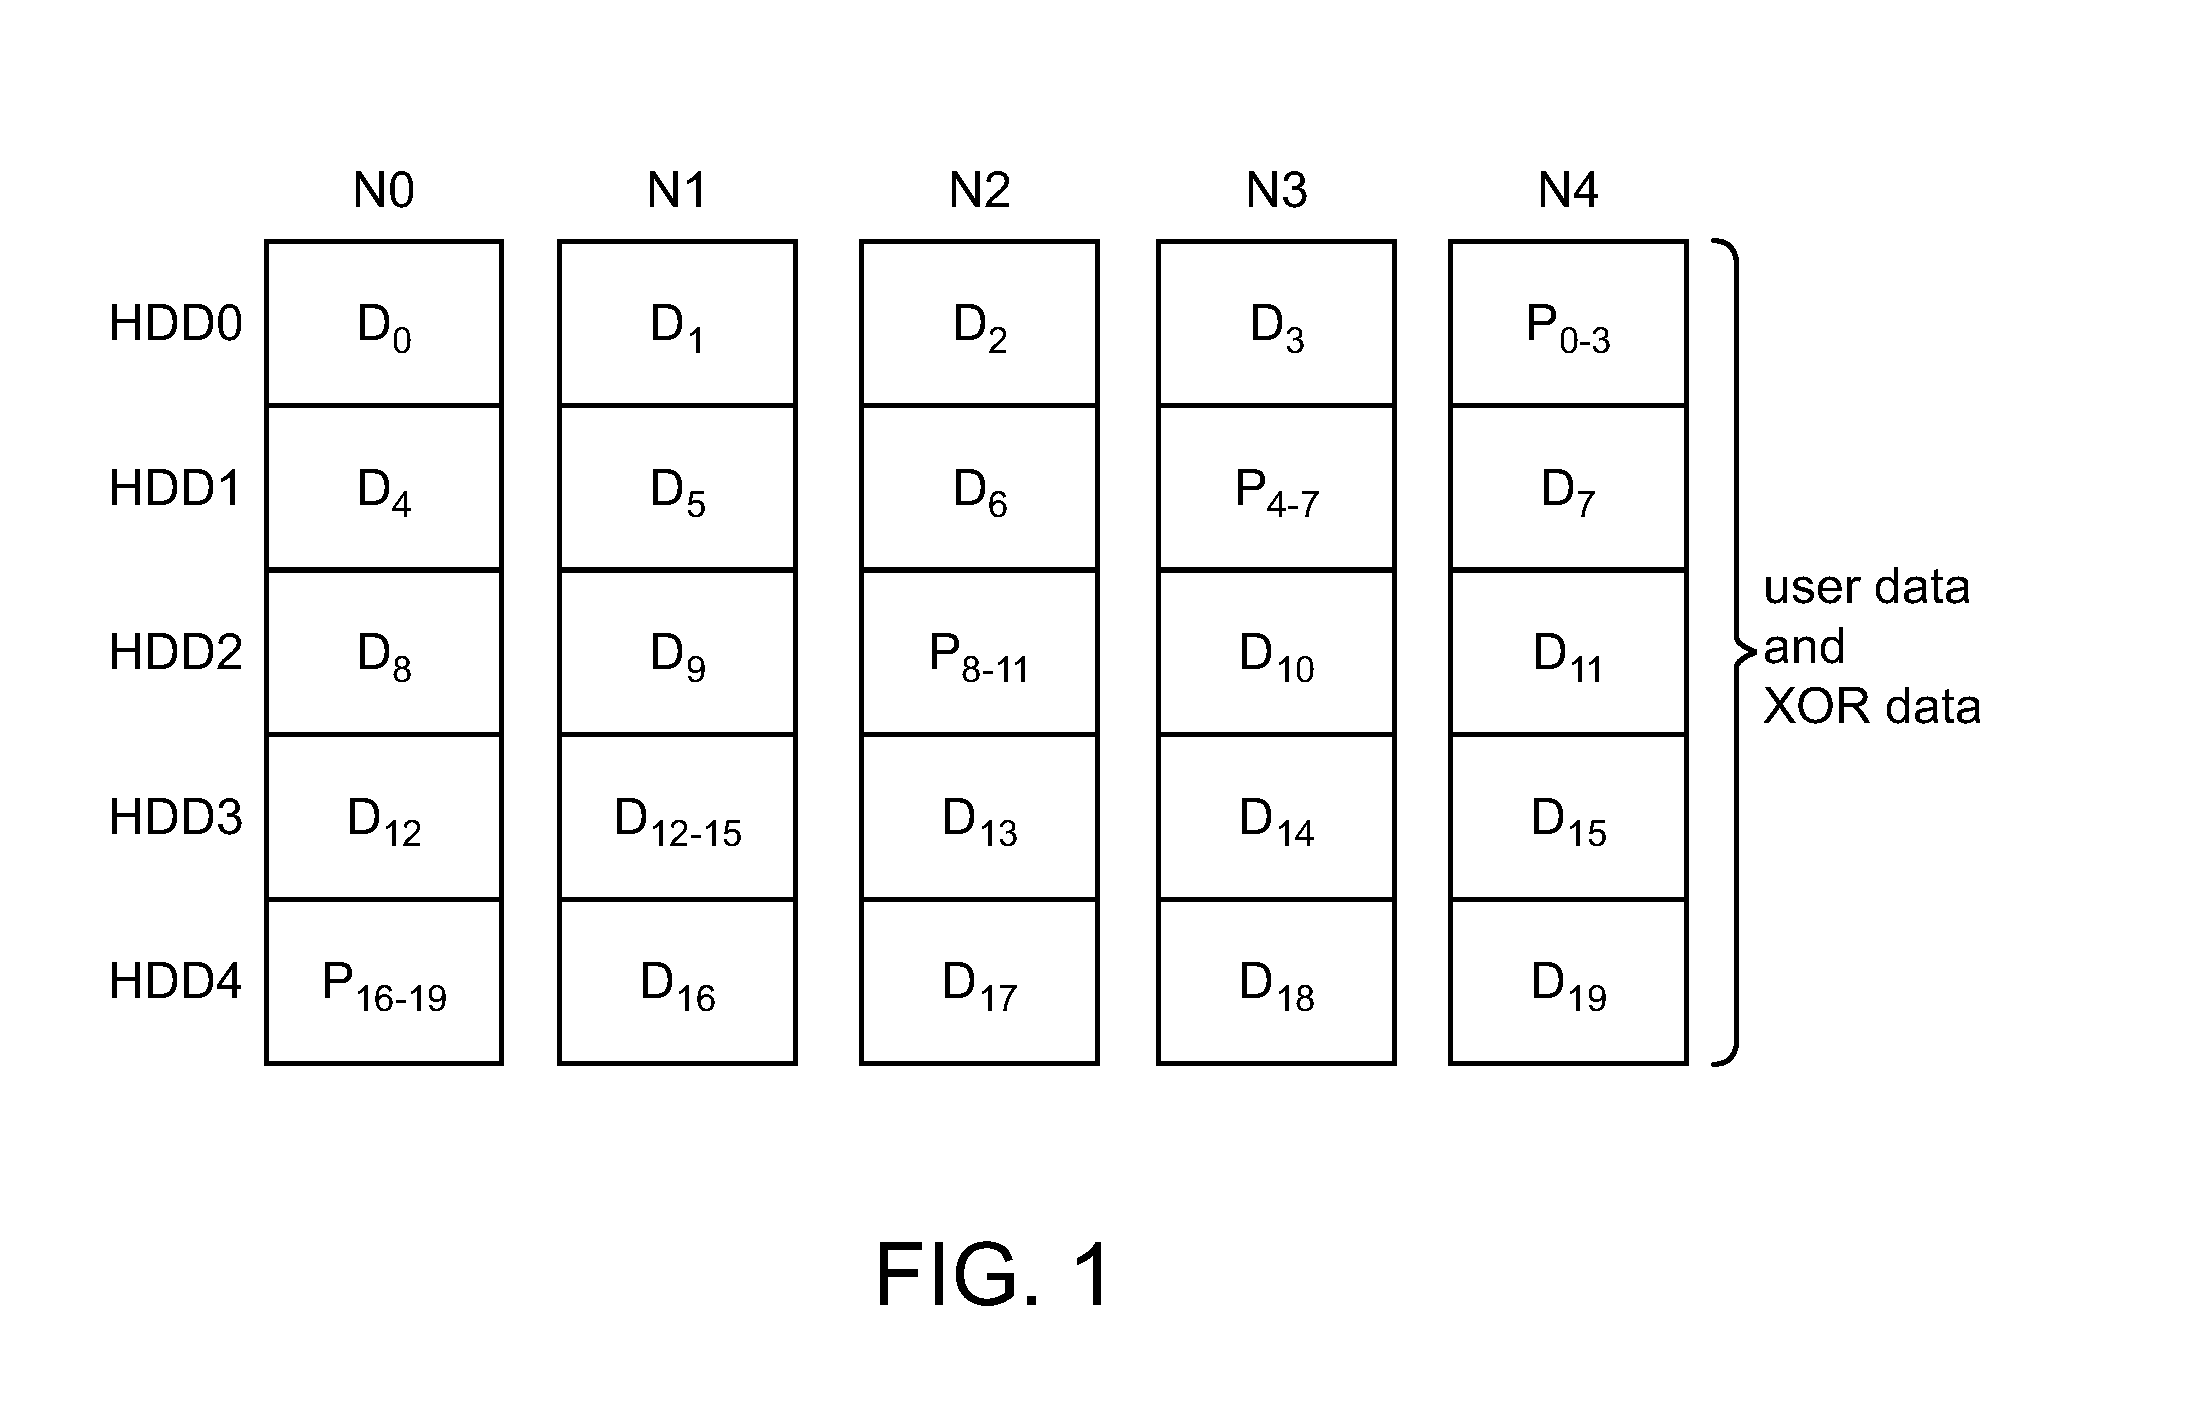 Full-stripe-write protocol for maintaining parity coherency in a write-back distributed redundancy data storage system